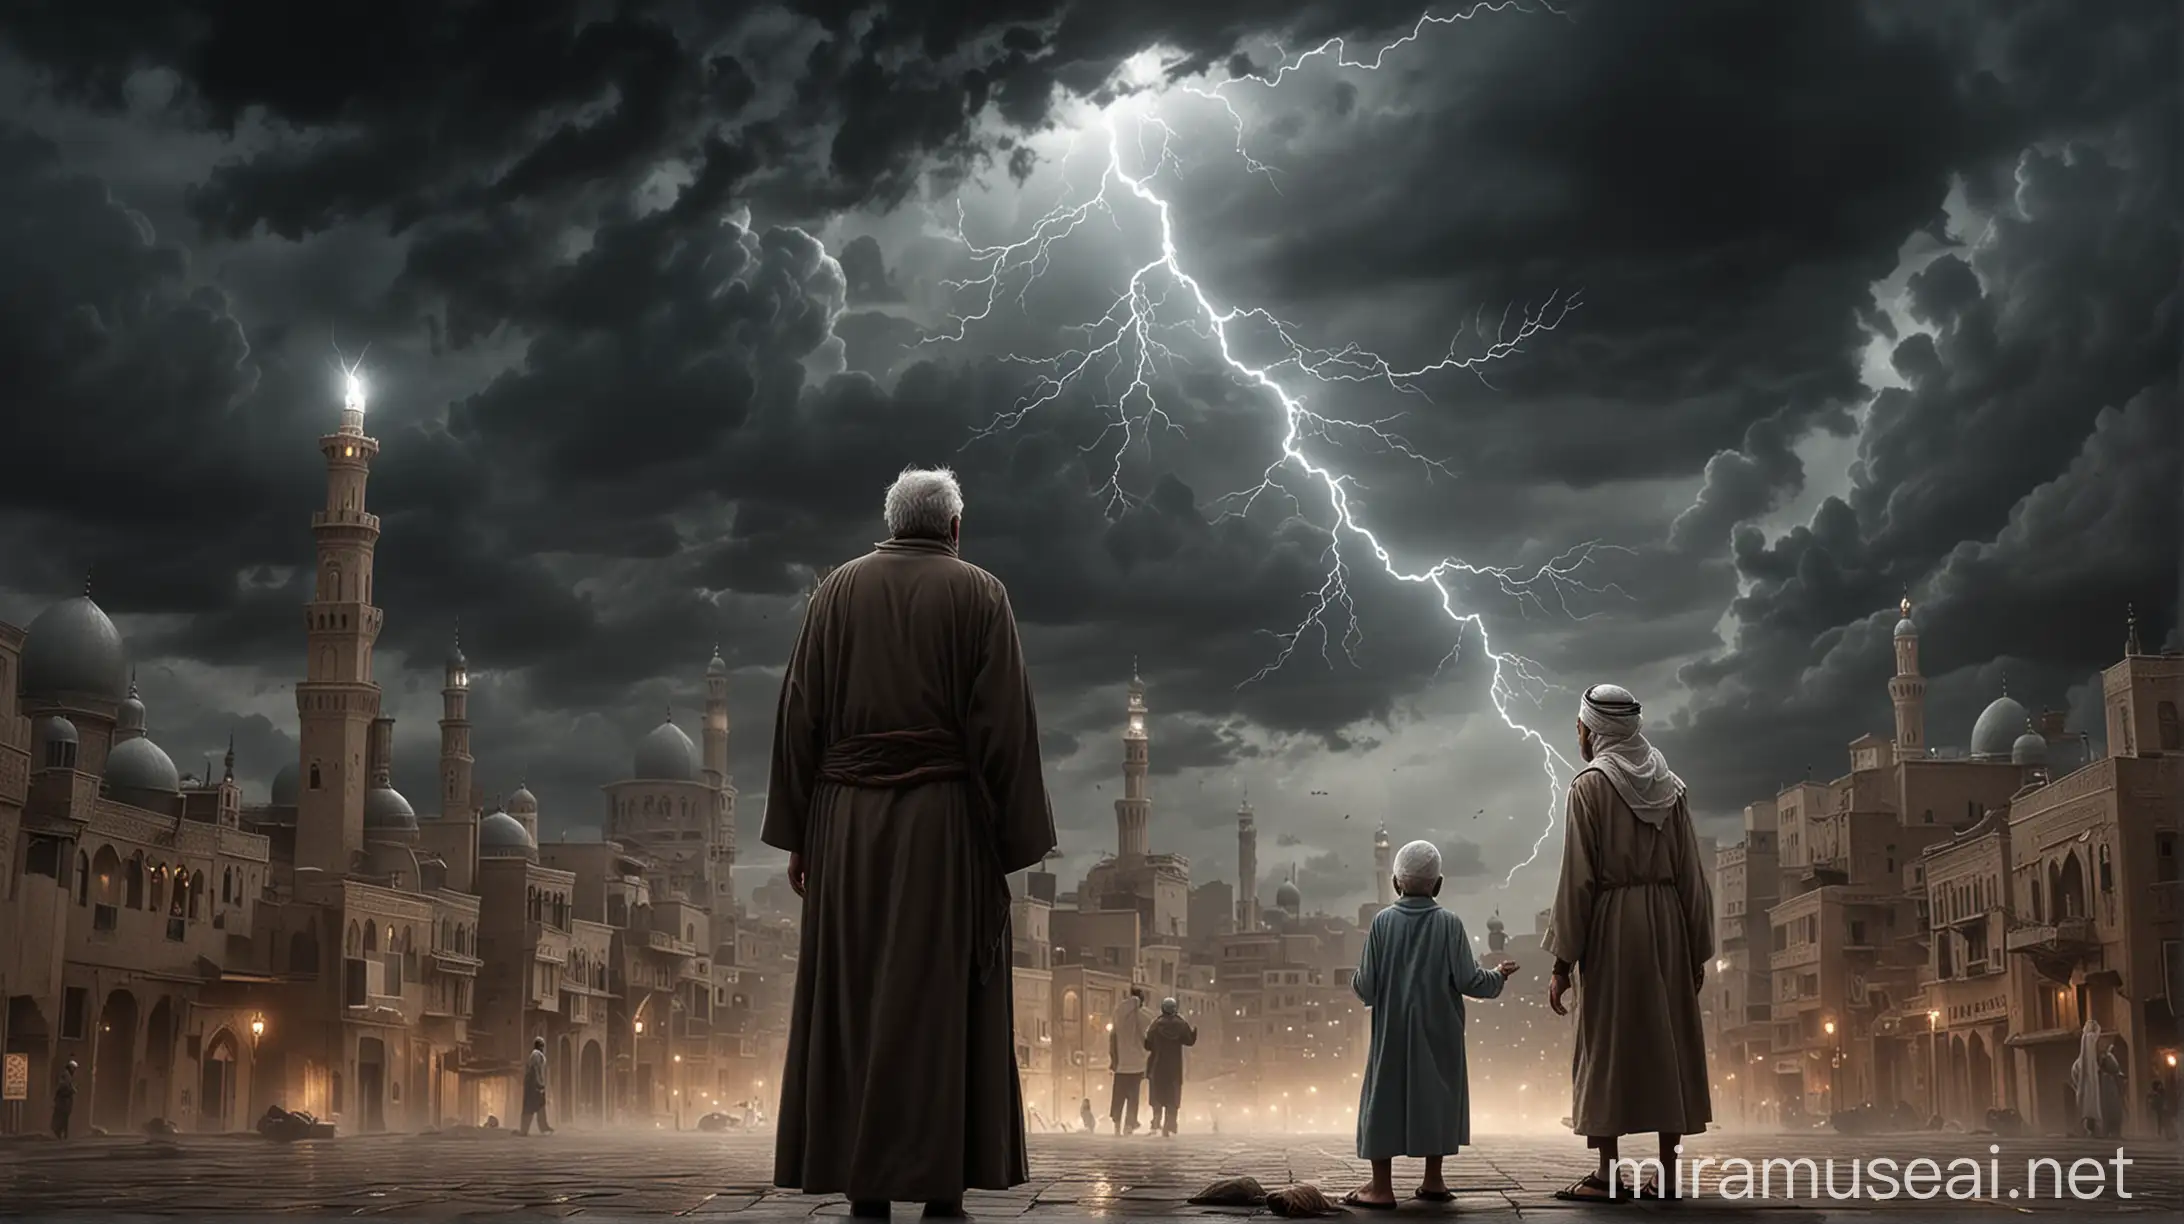 Scene Description: A dark, stormy sky over a city with lightning striking in the distance. In the foreground, a wise, elderly man with a serene expression is teaching a group of young children about the consequences of challenging Allah. Illustrations from the Quran are depicted in the background as ethereal, glowing images. Key Elements: Stormy sky, cityscape, lightning, elderly teacher, children, Quranic illustrations. Mood/Theme: The power and majesty of Allah, the importance of teaching and learning, the contrast between divine power and human humility